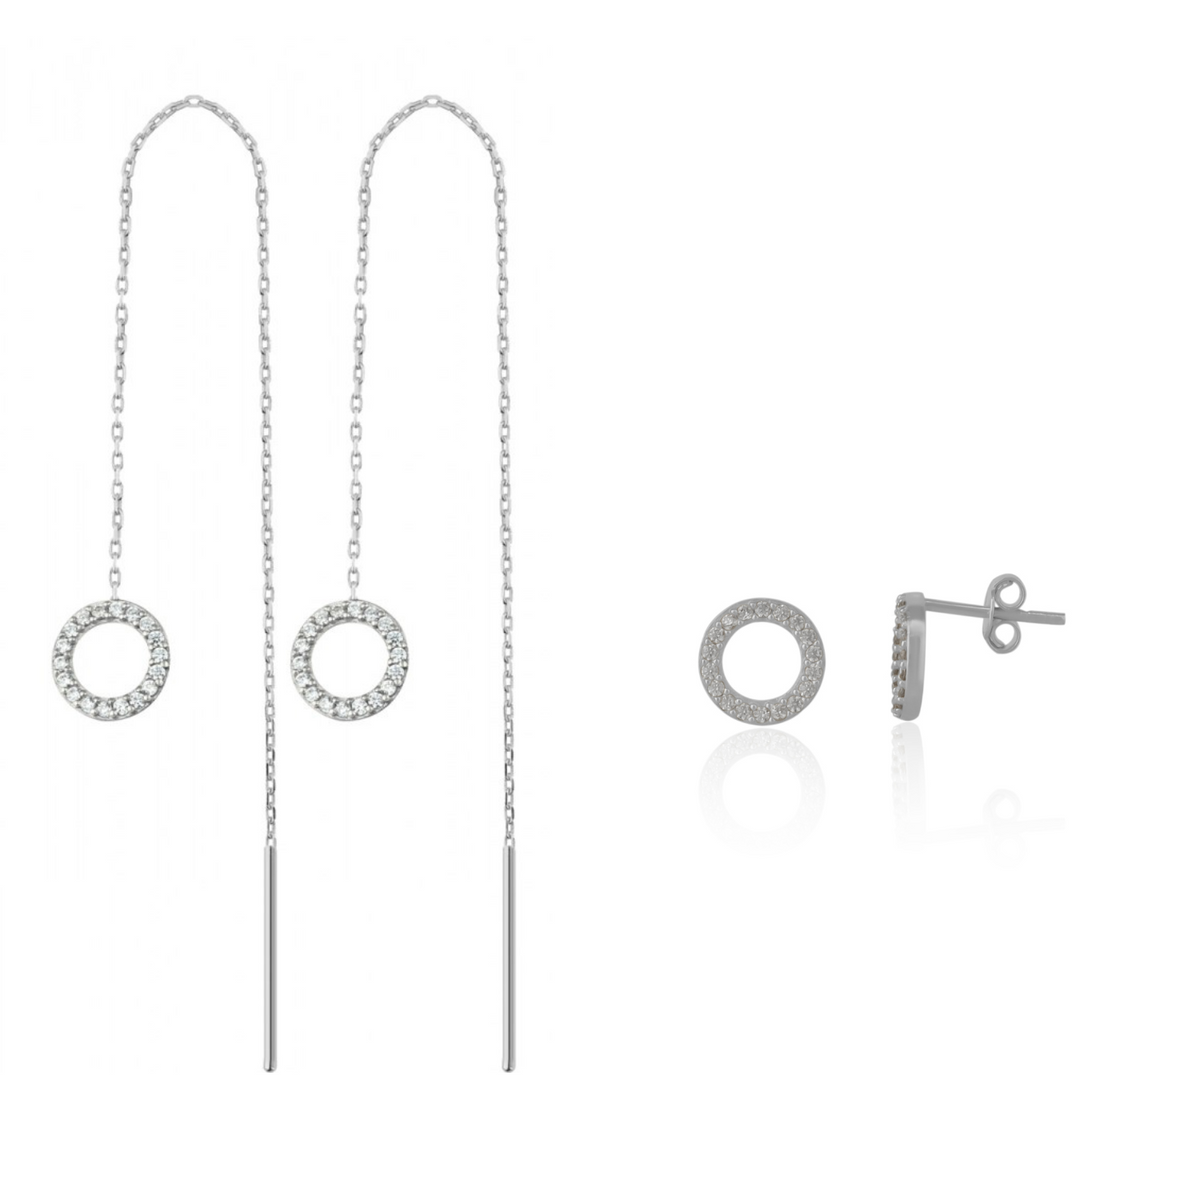 Circle Round One Drop One Stud Earring Sterling Silver Set